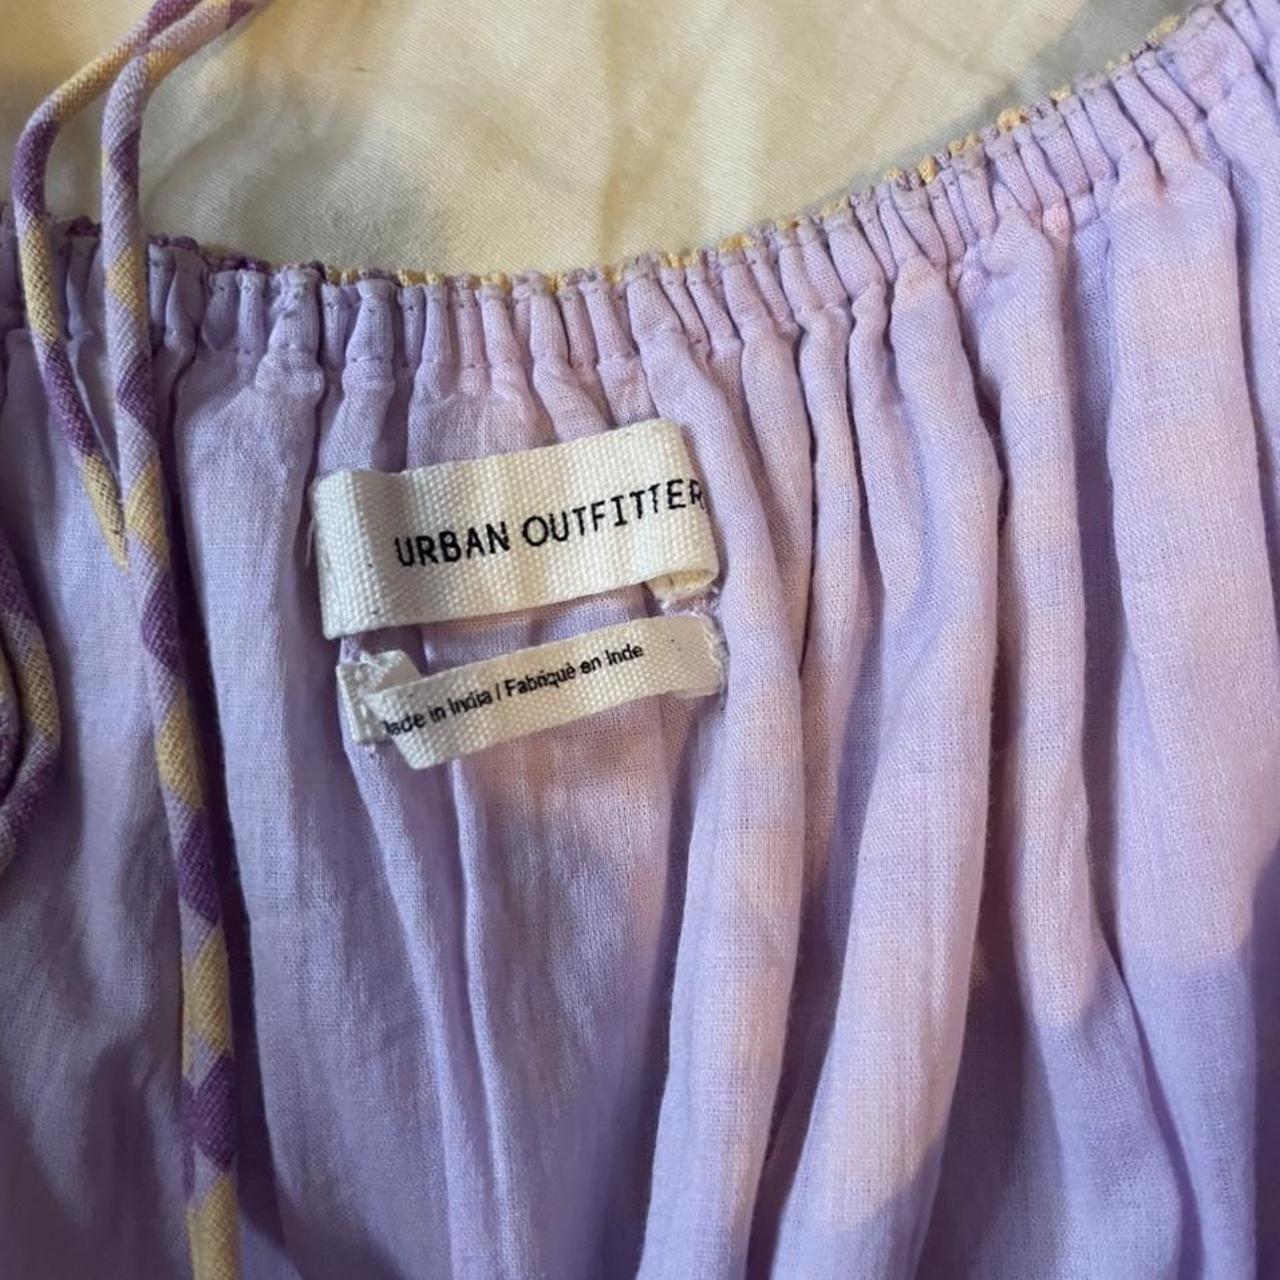 Urban Outfitters Women's Purple and Cream Dress | Depop